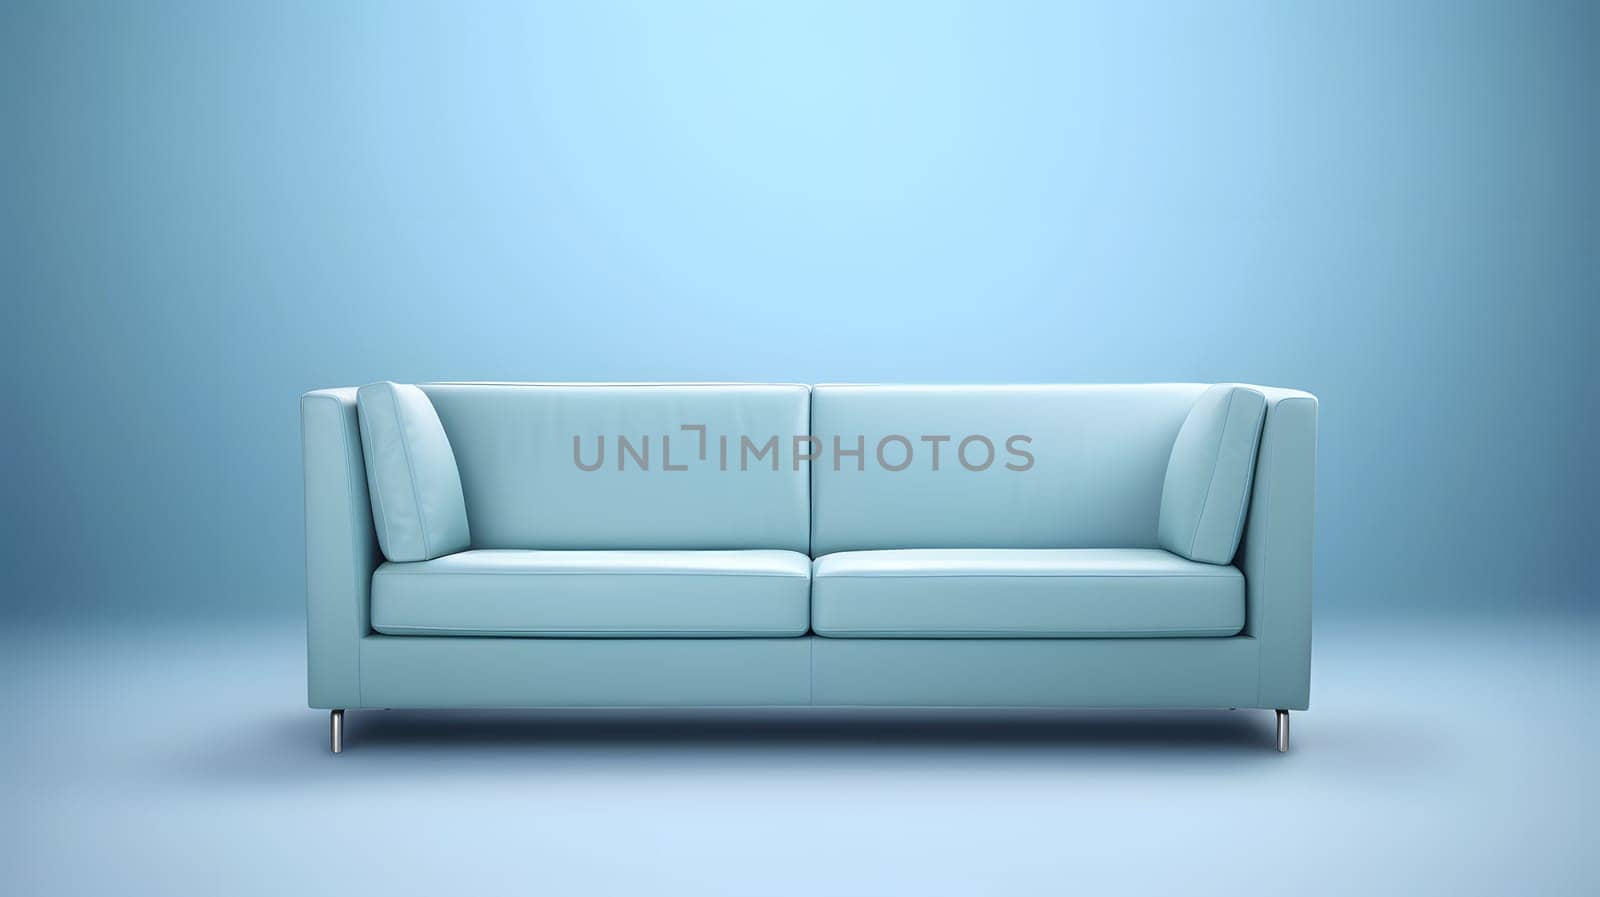 Minimalist light-blue sofa on light blue background, neural network generated image by z1b